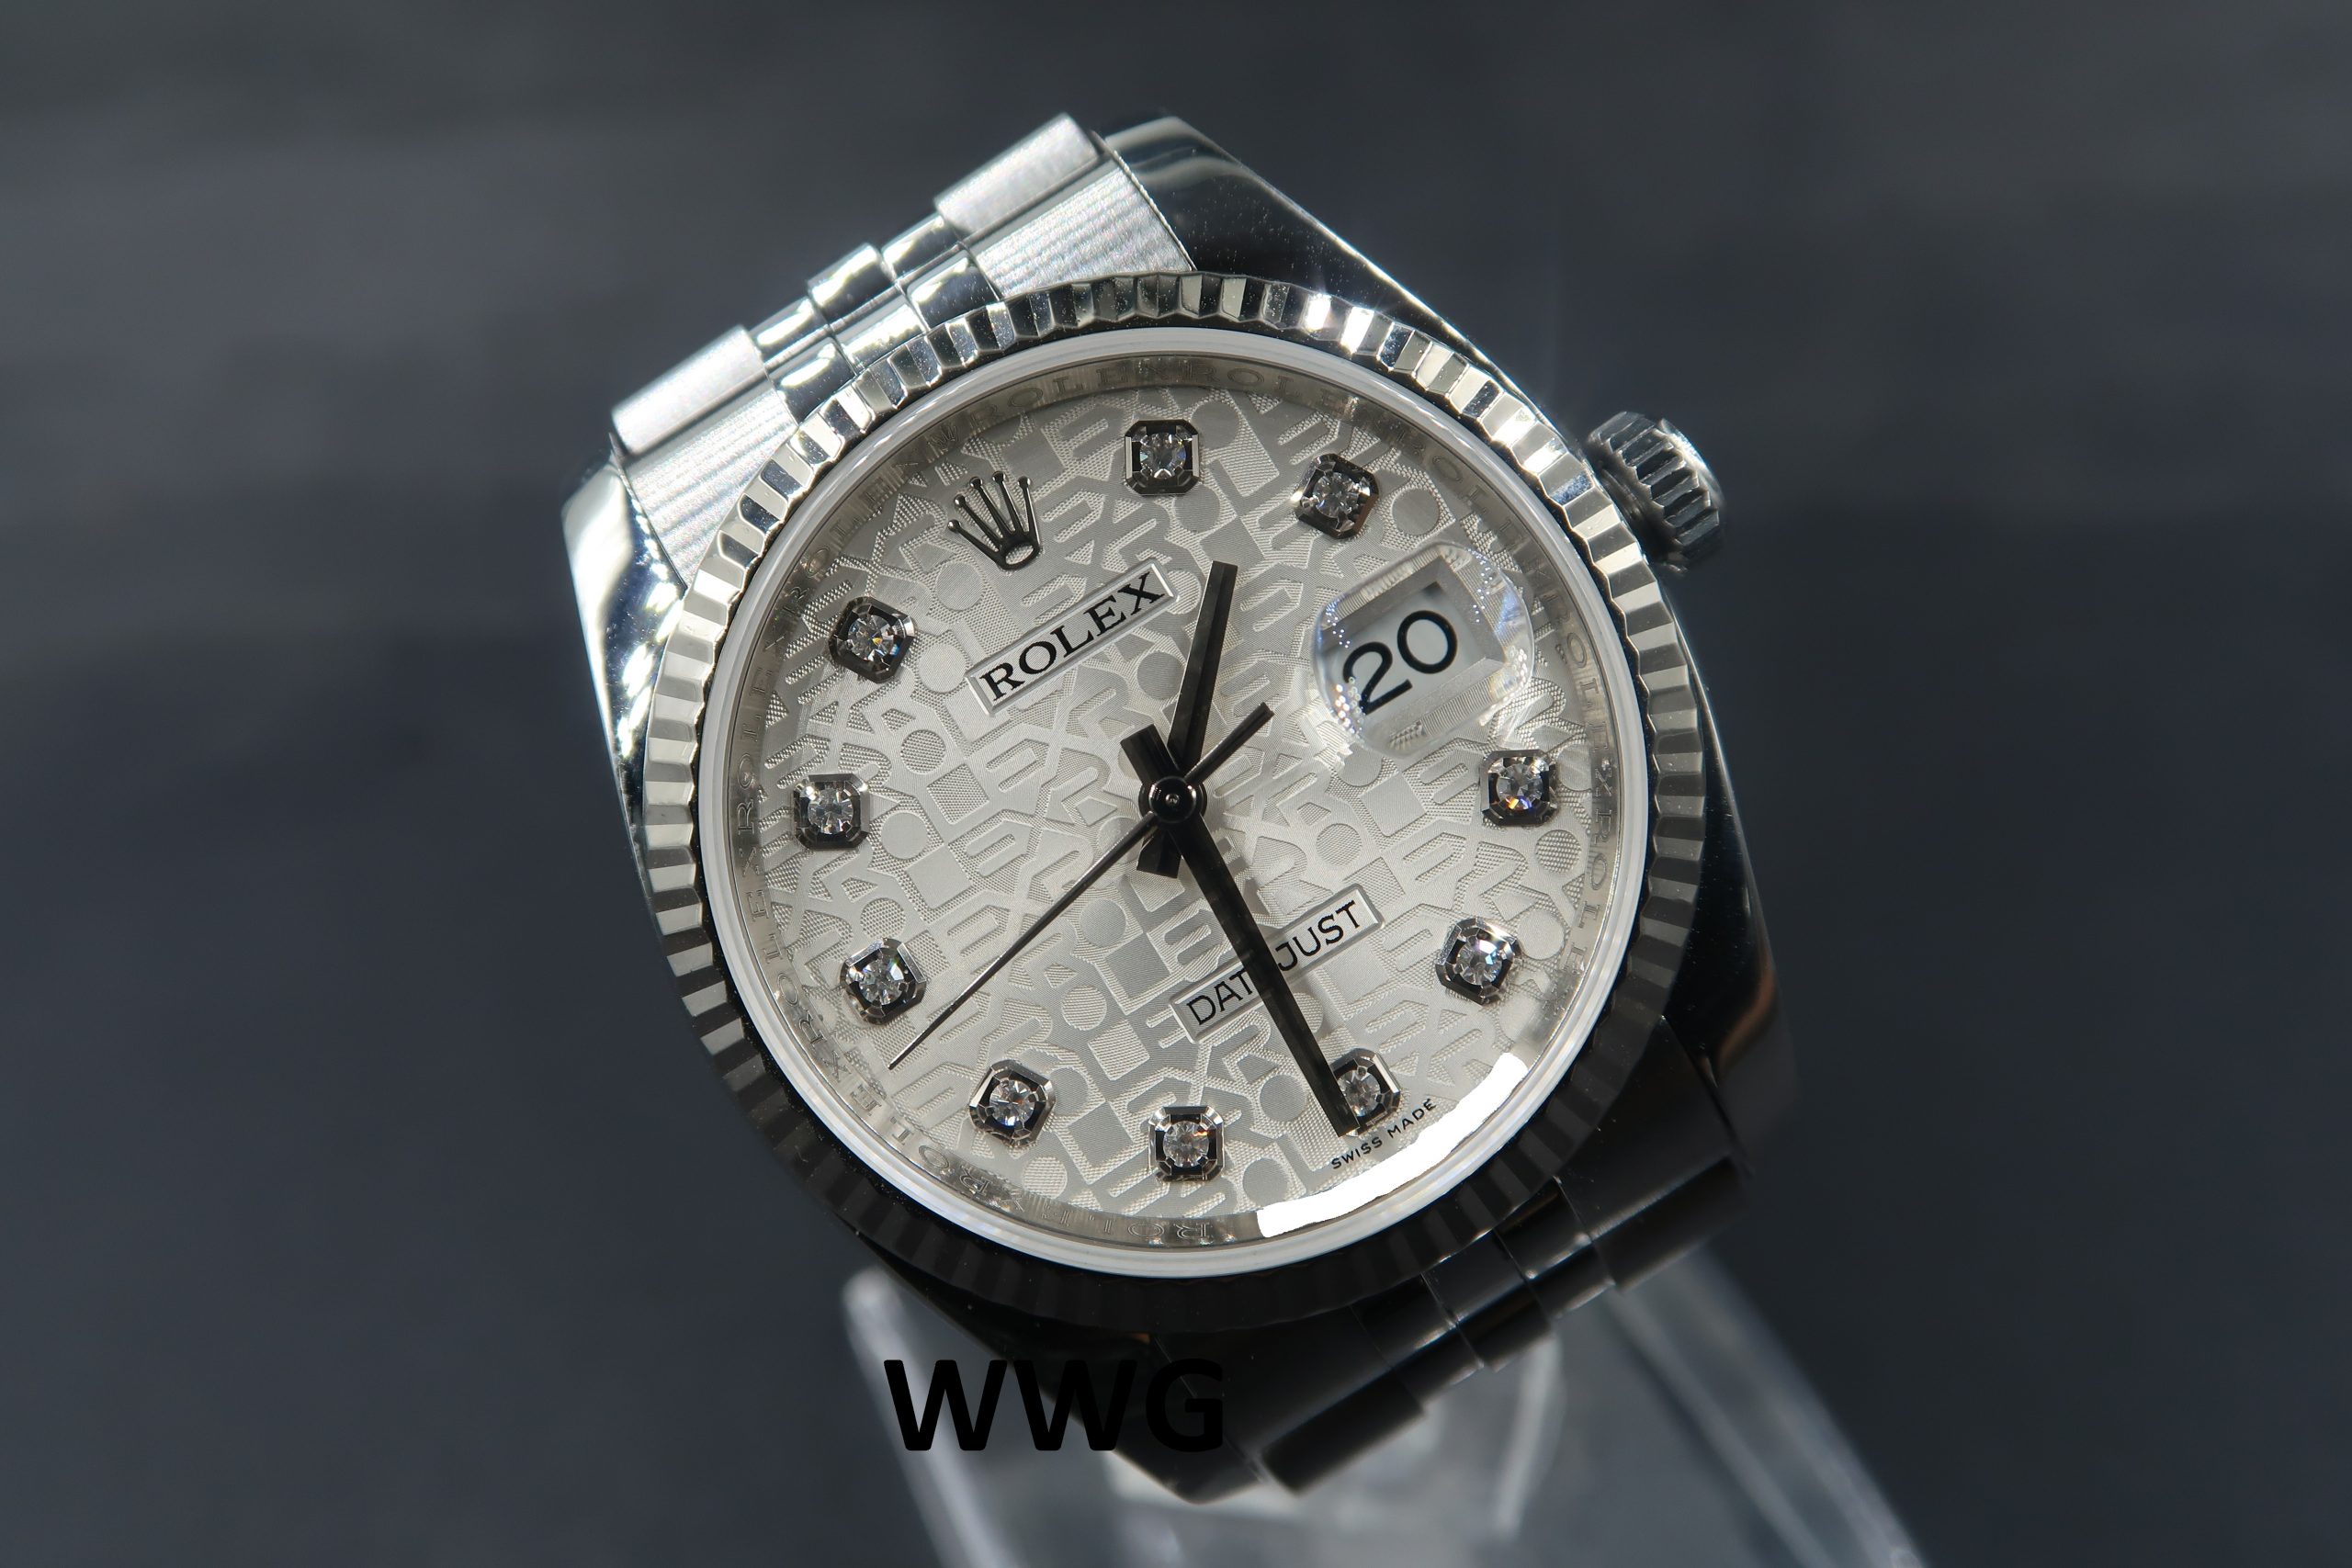 2007 rolex oyster perpetual datejust